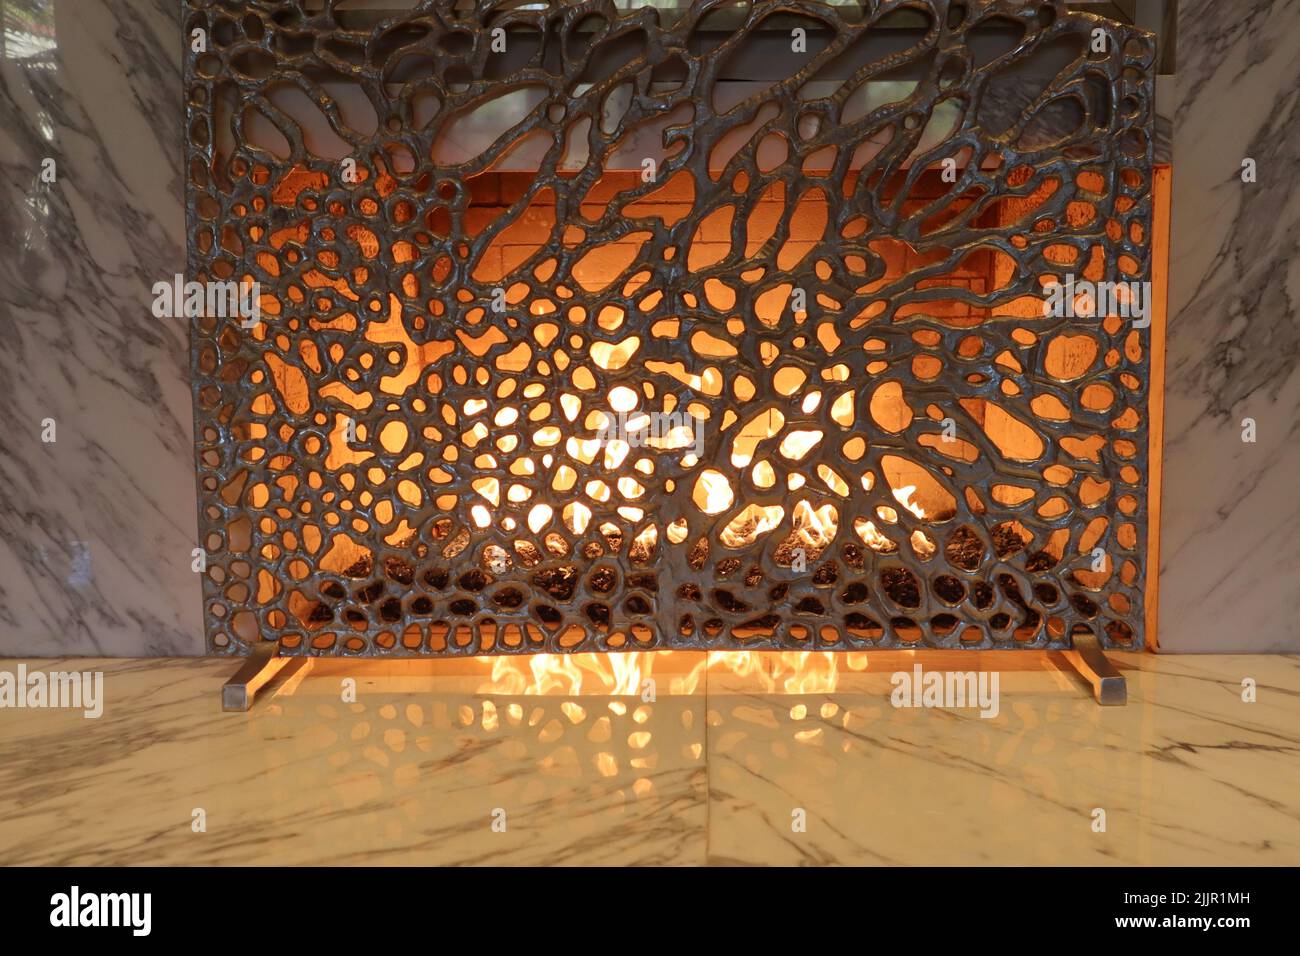 A textured fireplace cover in front of fire with marble tiling Stock Photo